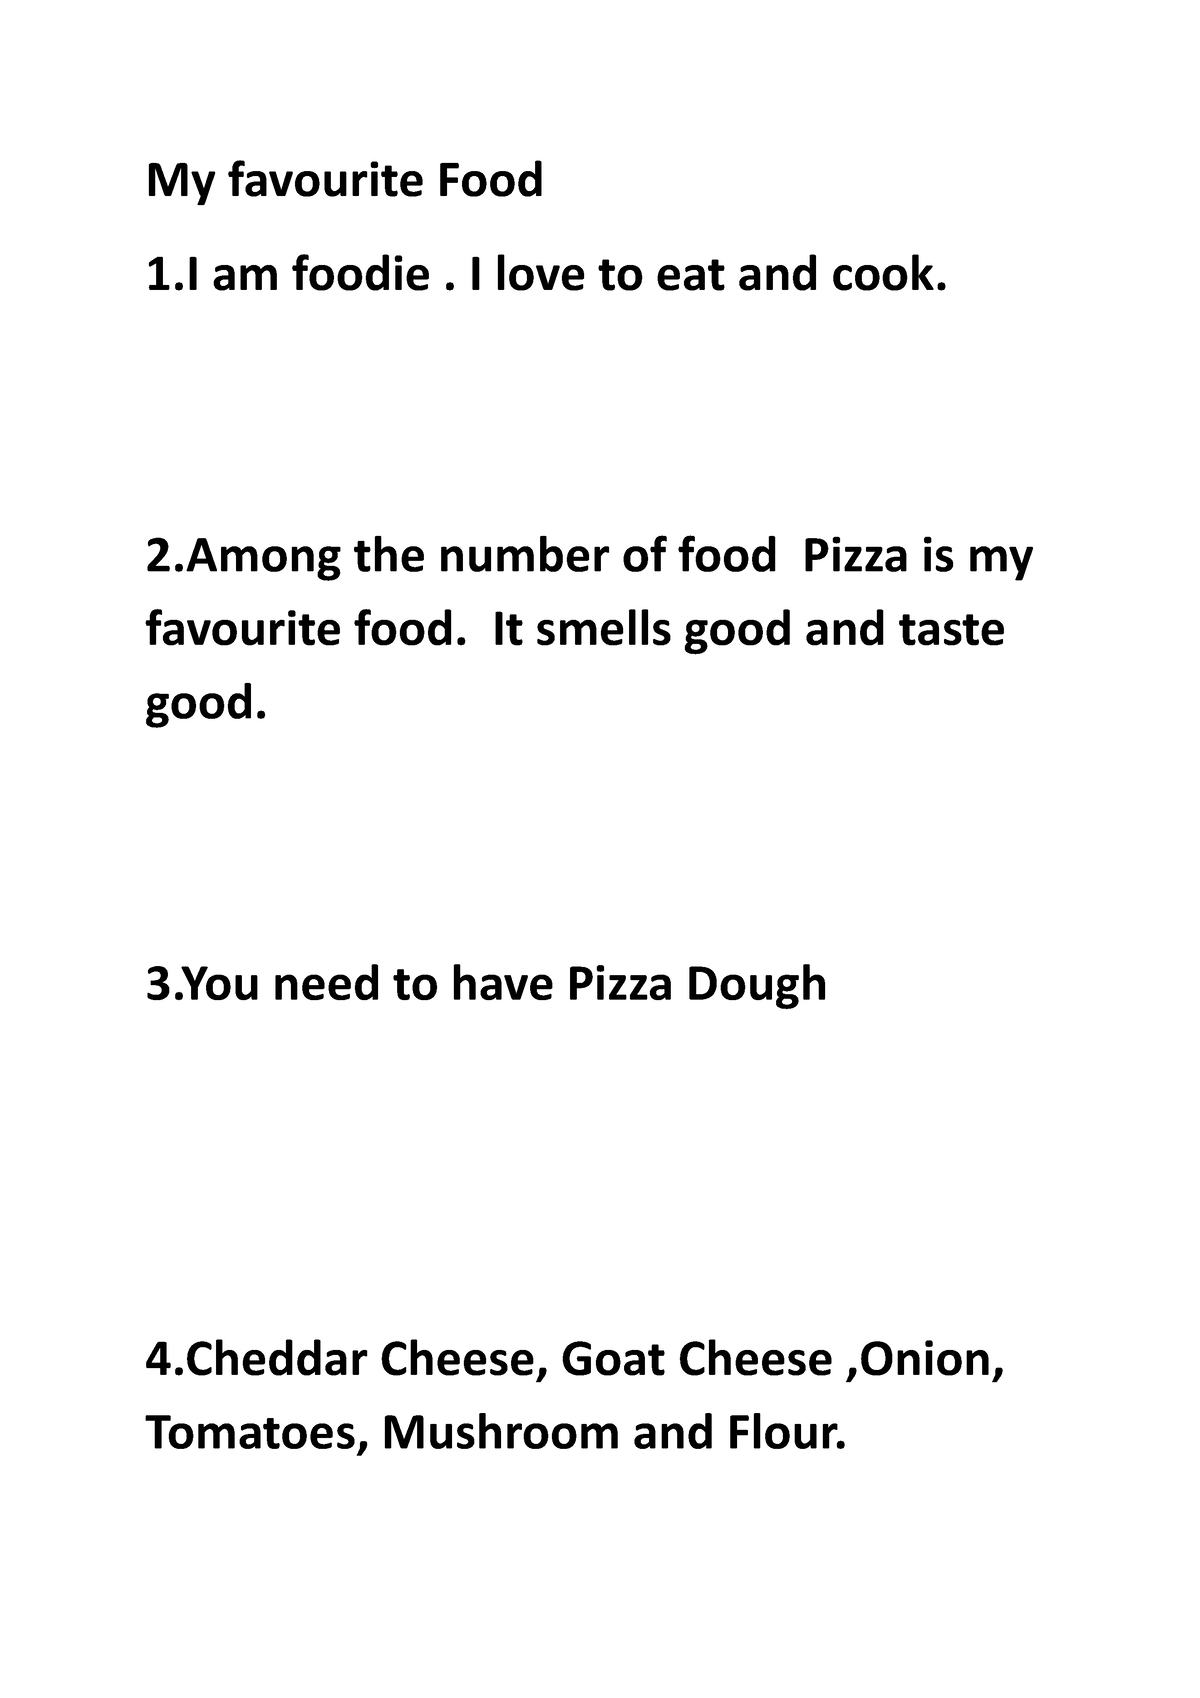 My favourite Food - pass - My favourite Food 1 am foodie. I love to eat ...